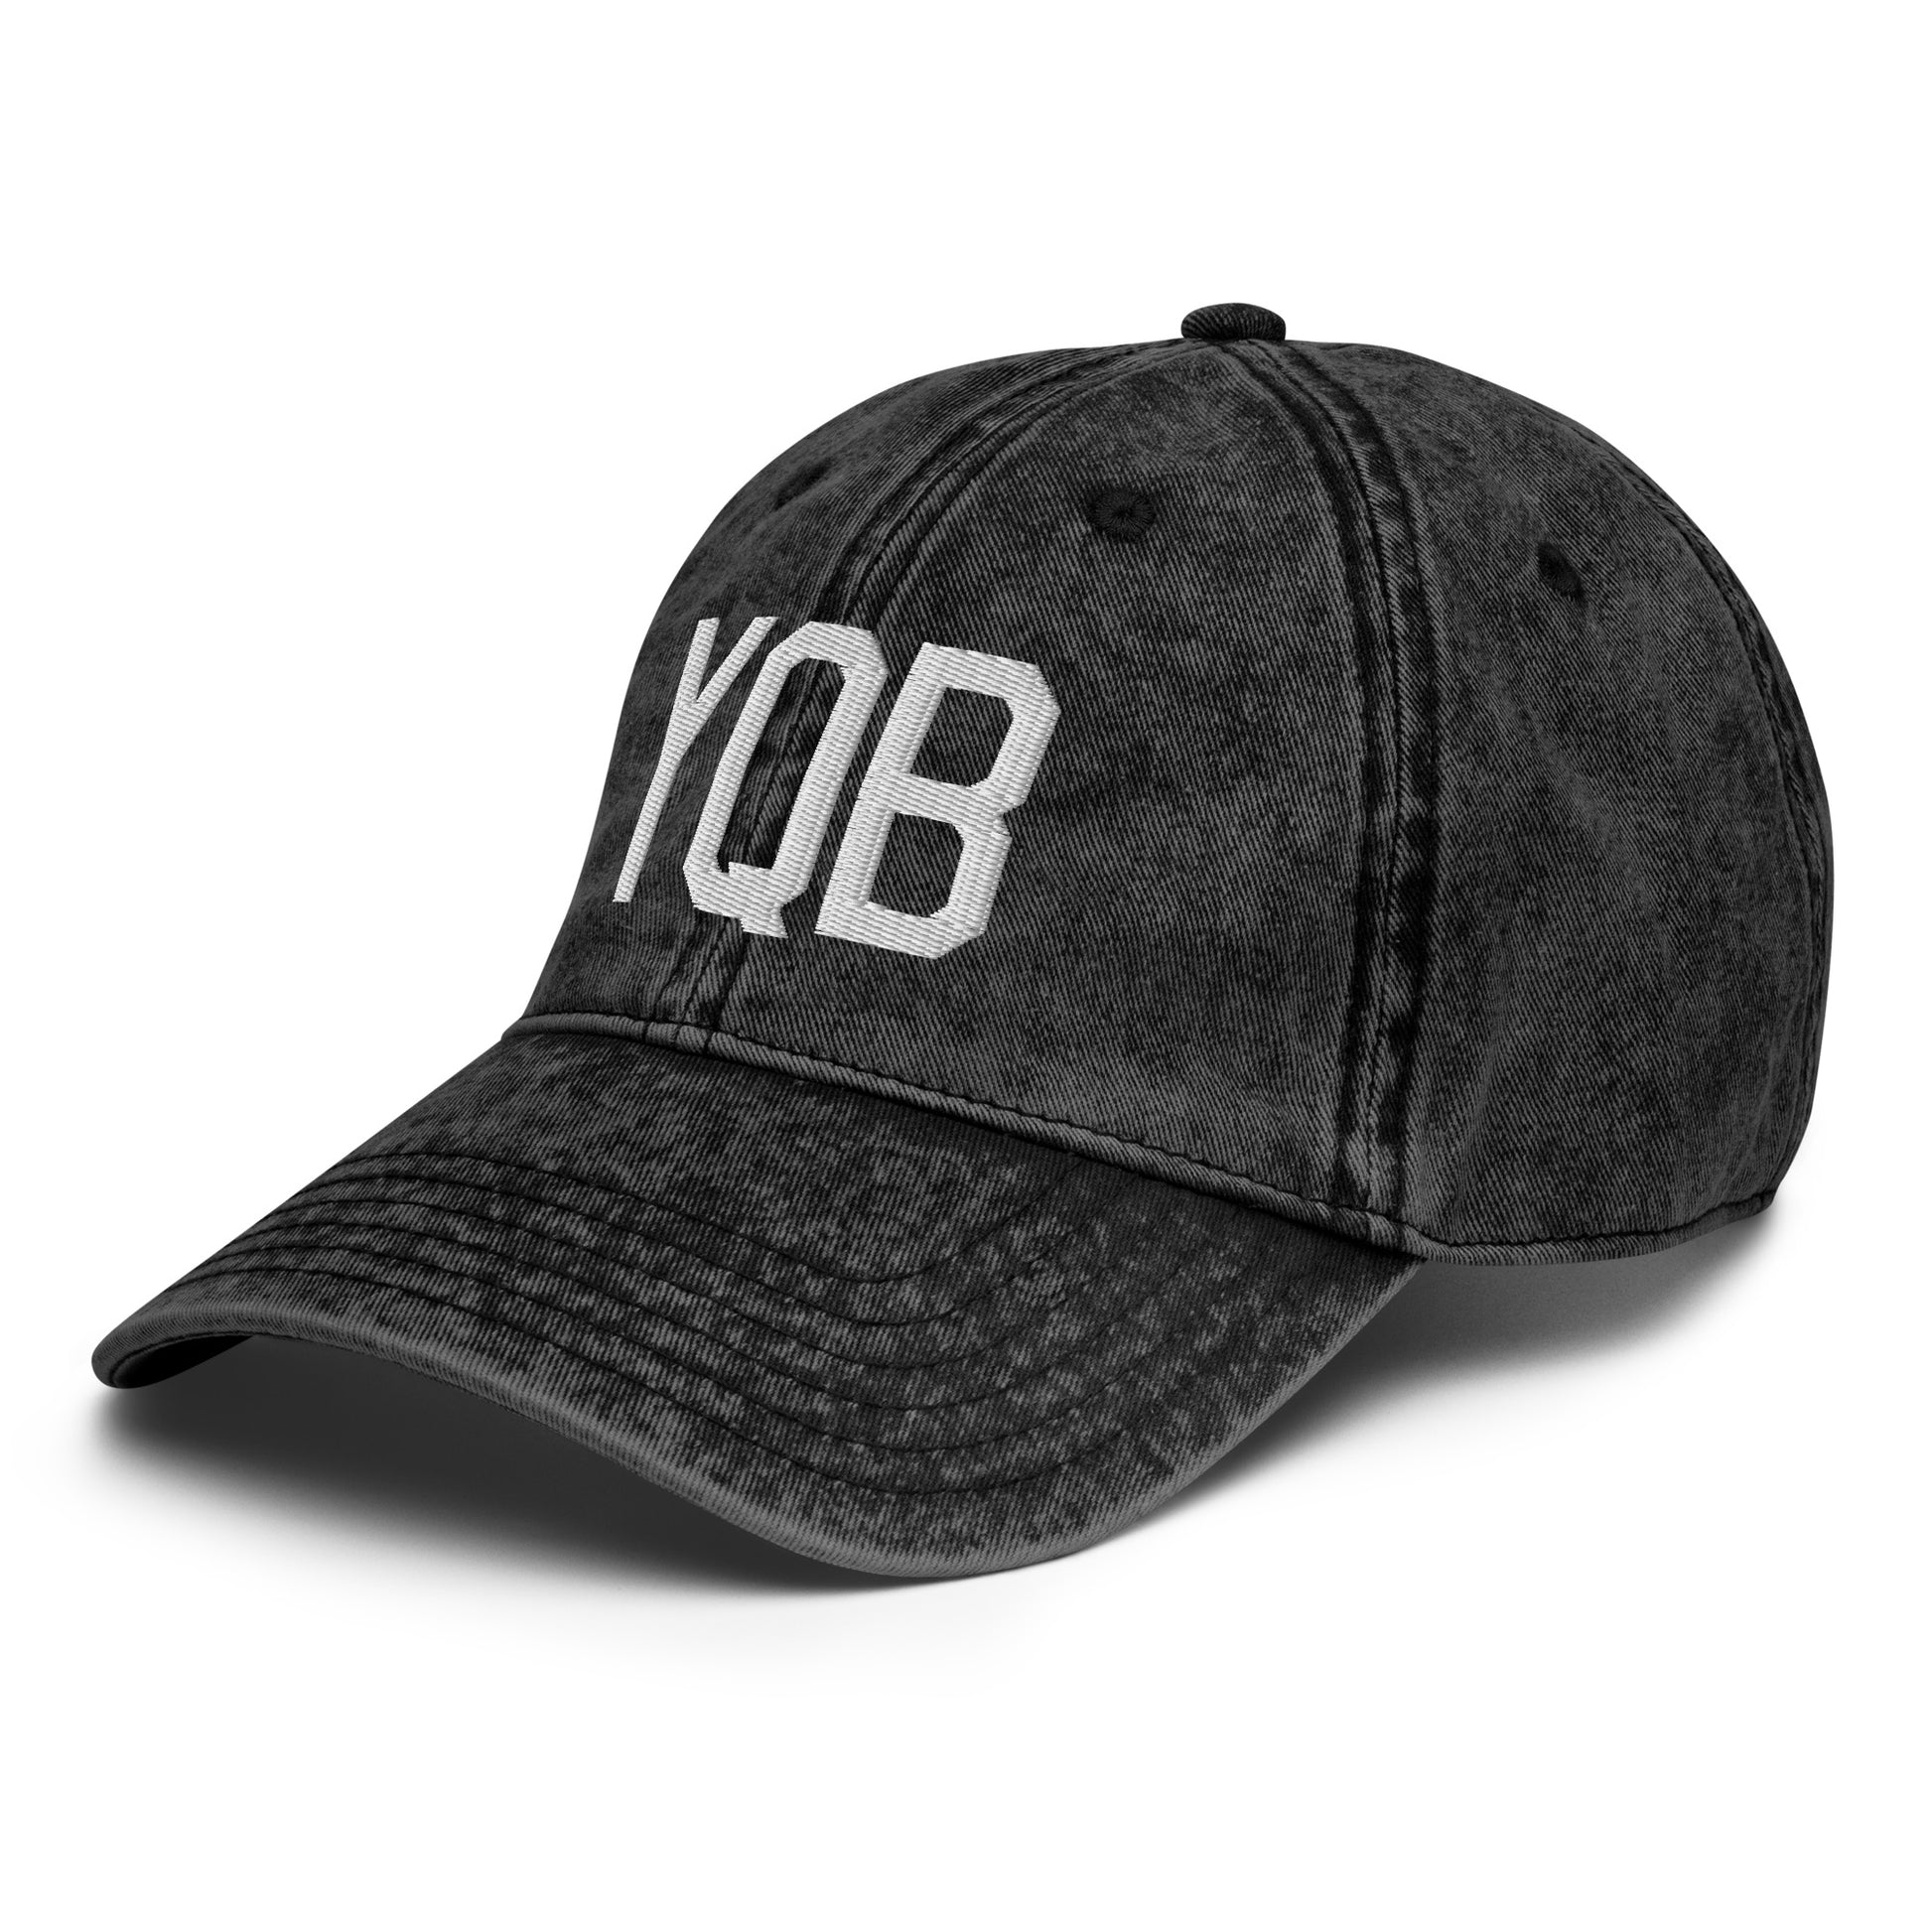 Airport Code Twill Cap - White • YQB Quebec City • YHM Designs - Image 01